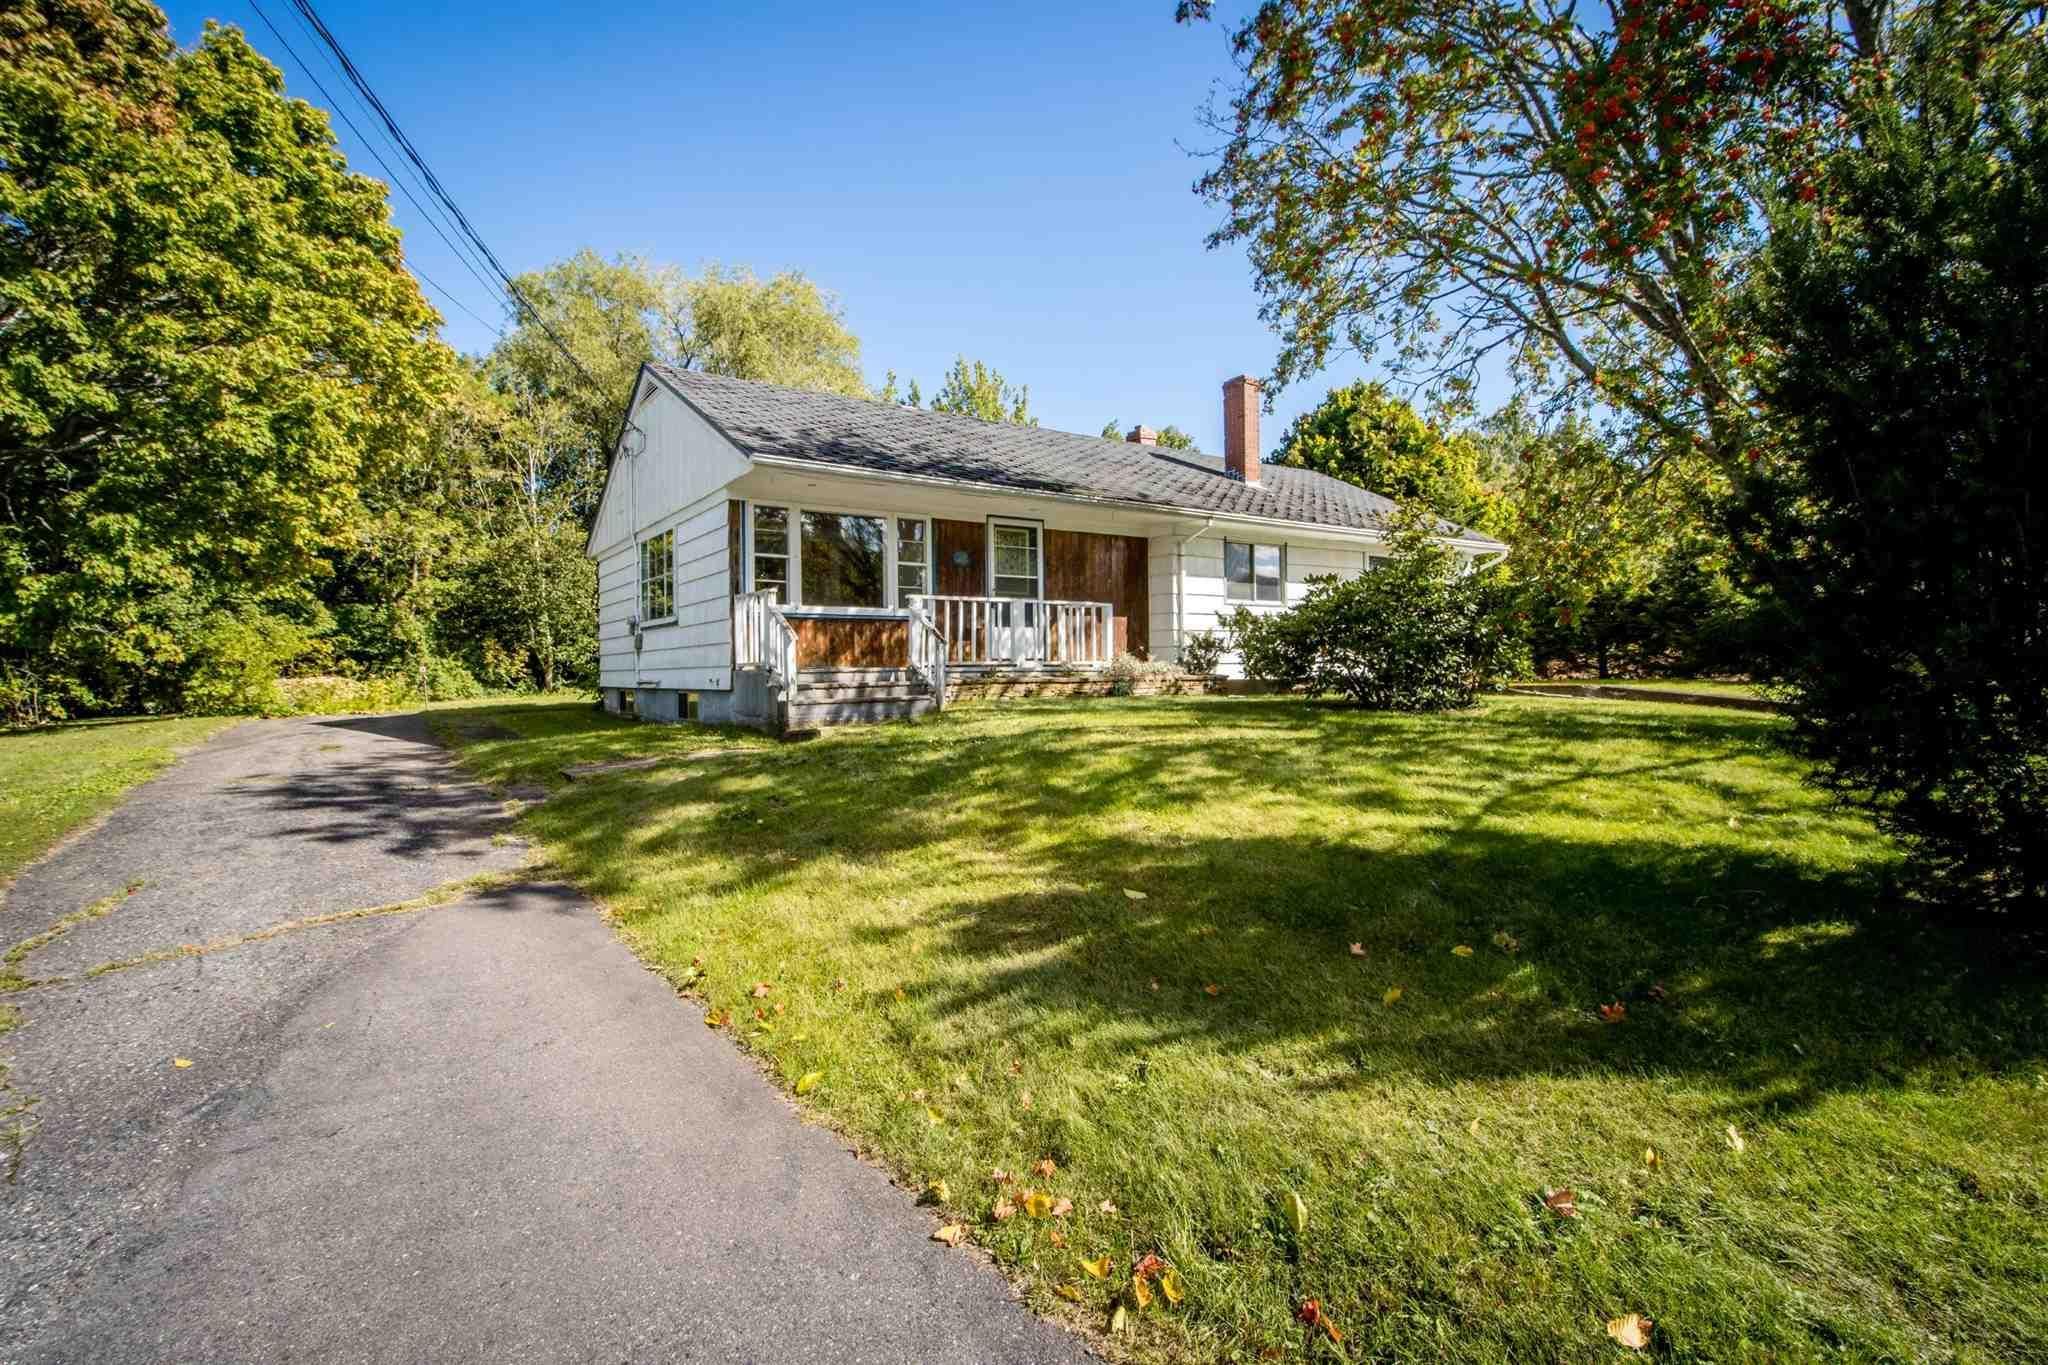 Main Photo: 21 Hillcrest Avenue in Wolfville: 404-Kings County Residential for sale (Annapolis Valley)  : MLS®# 202124195